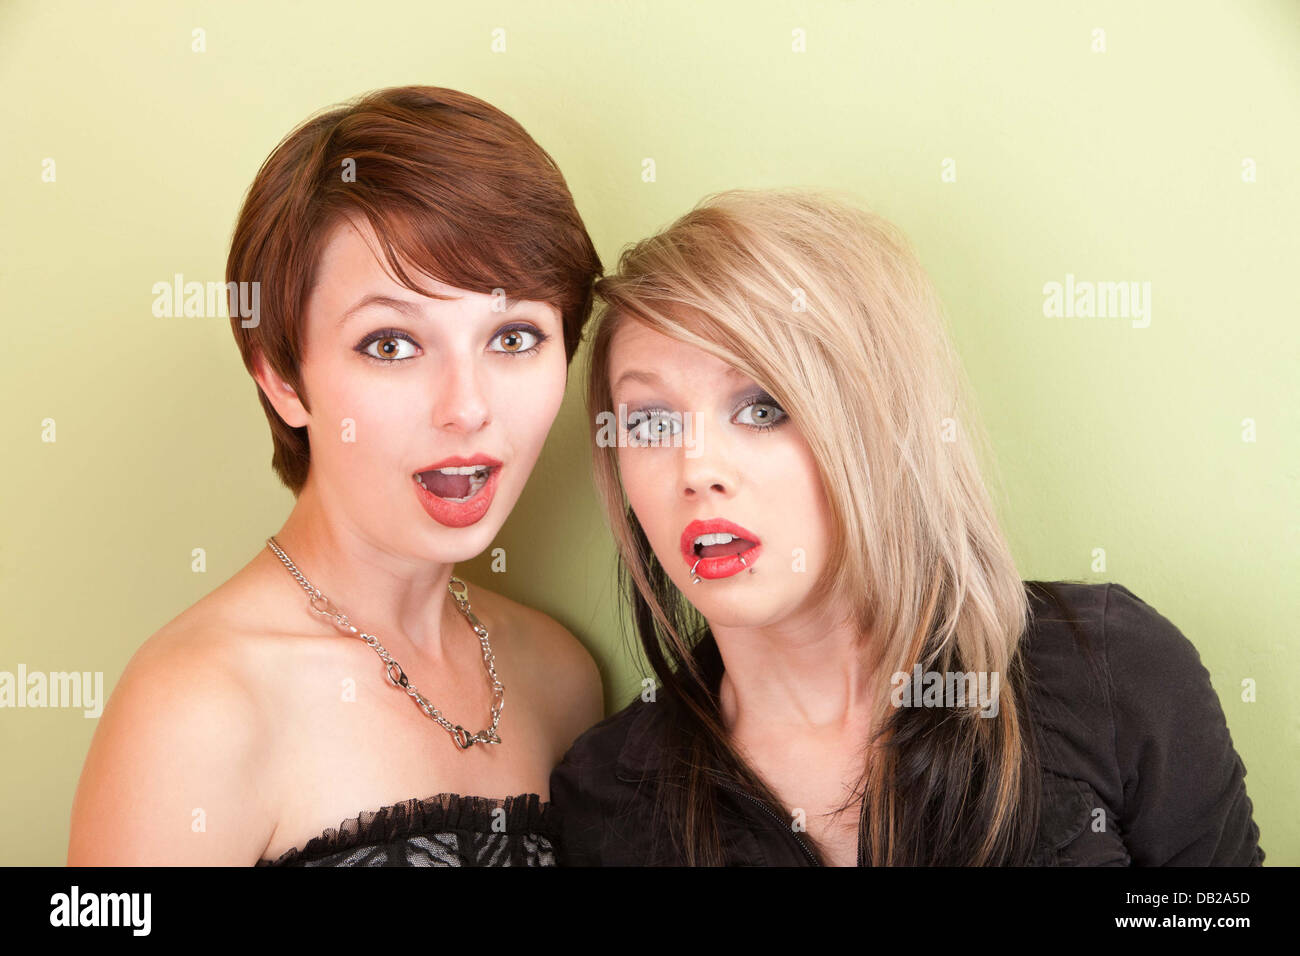 Surprised young punky looking girls Stock Photo